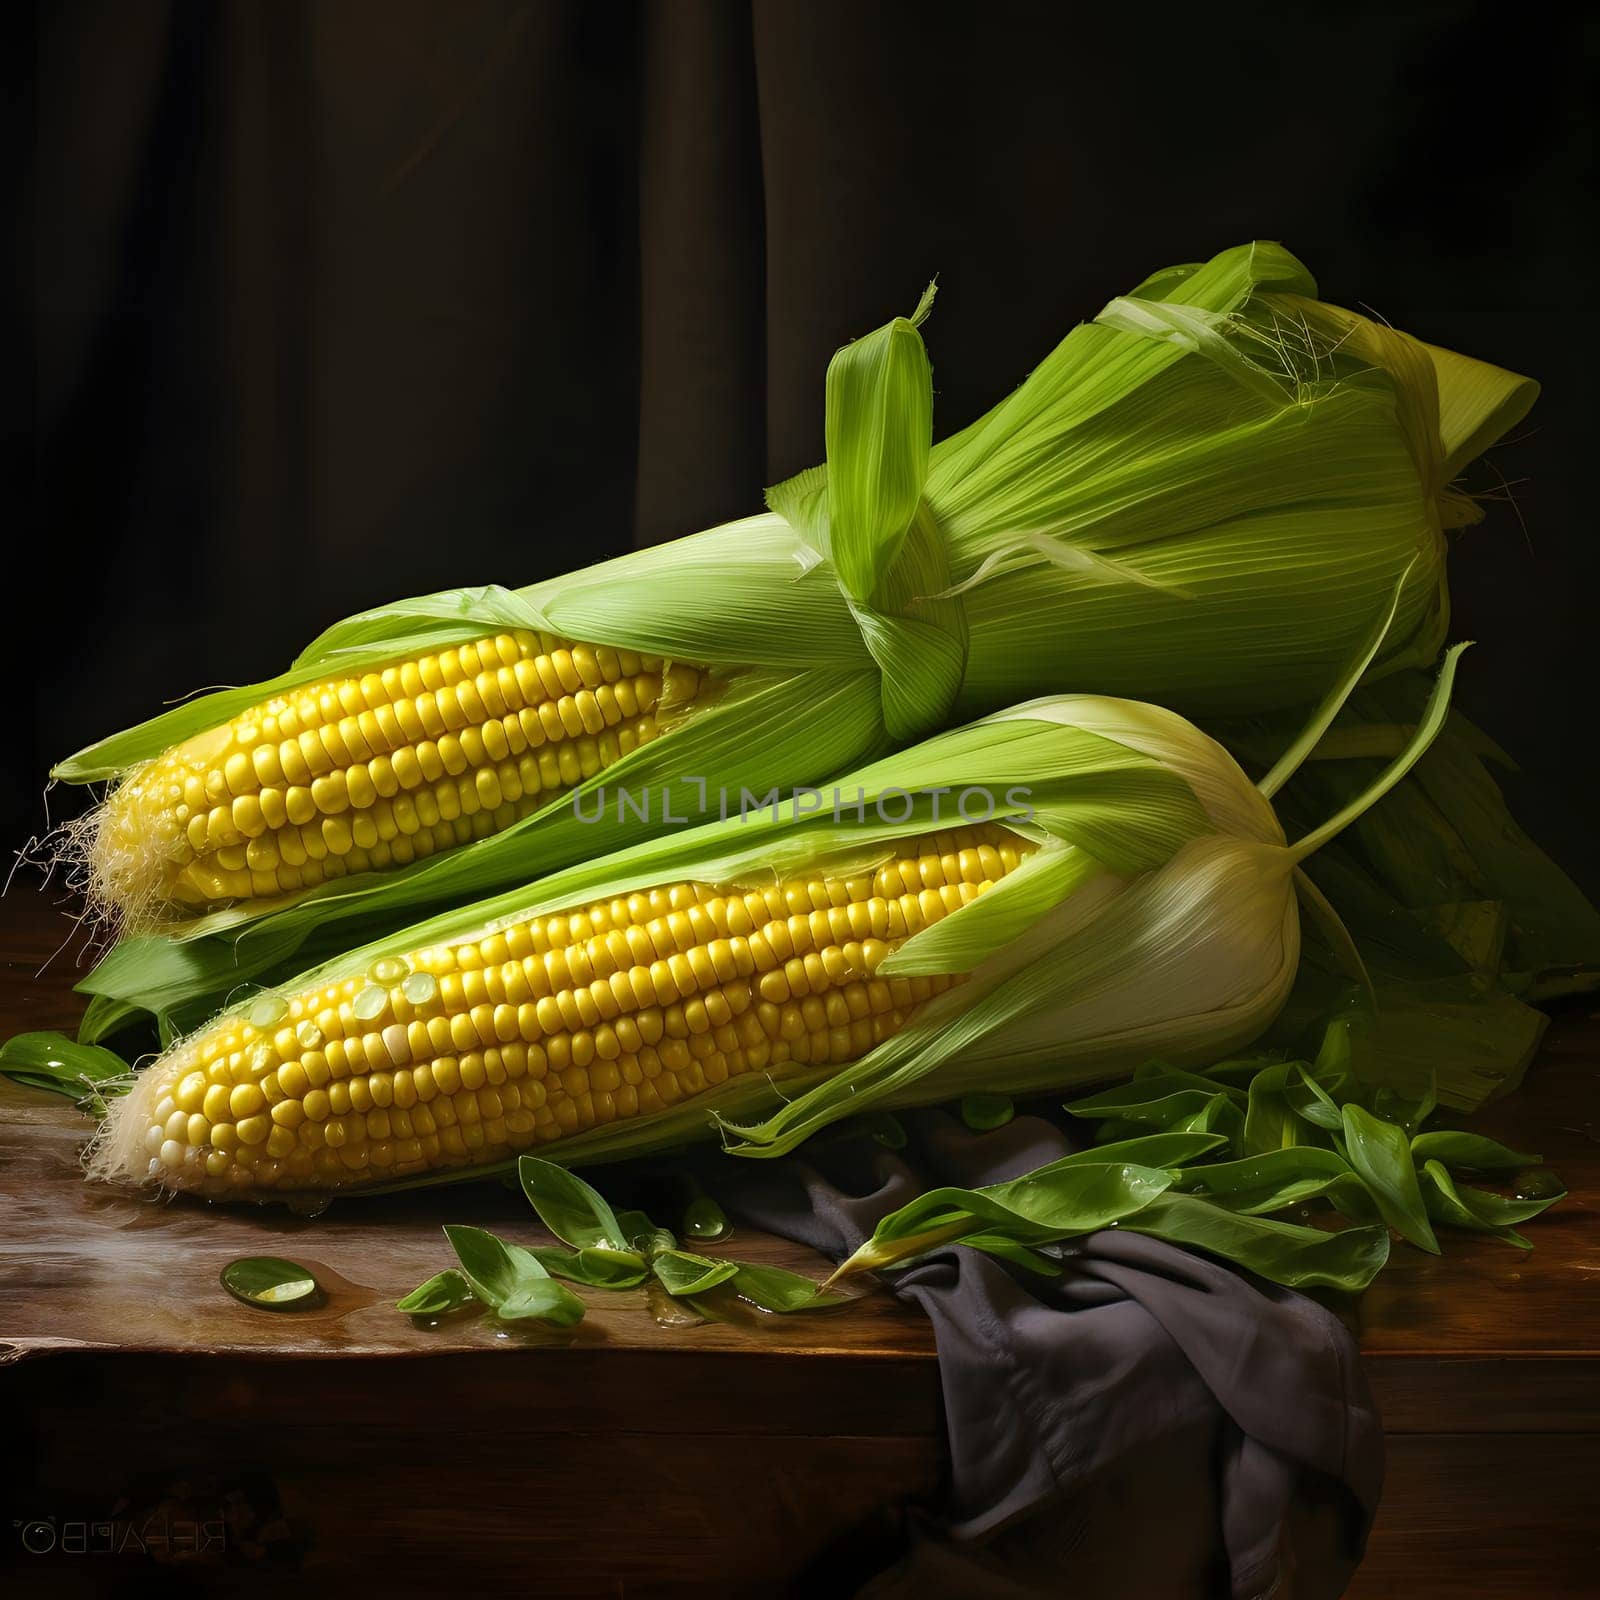 Two unpeeled yellow corn cobs on a wooden table dark background. Corn as a dish of thanksgiving for the harvest. An atmosphere of joy and celebration.